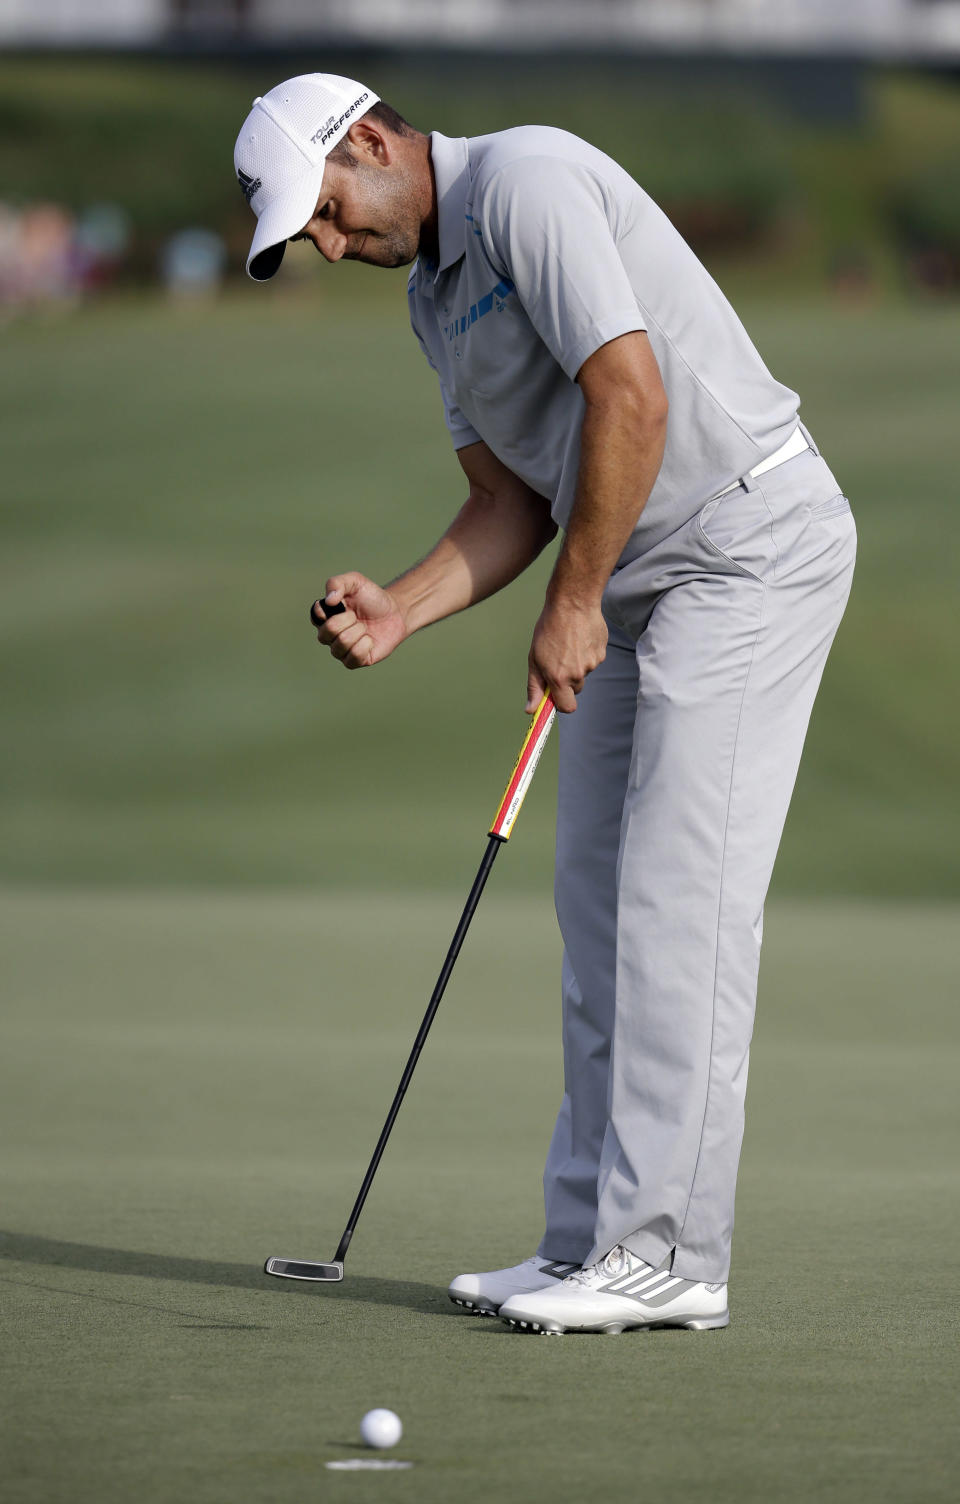 Sergio Garcia, of Spain, watches as his ball makes par on the 18th hole during the third round of The Players championship golf tournament at TPC Sawgrass, Saturday, May 10, 2014, in Ponte Vedra Beach, Fla. (AP Photo/Lynne Sladky)